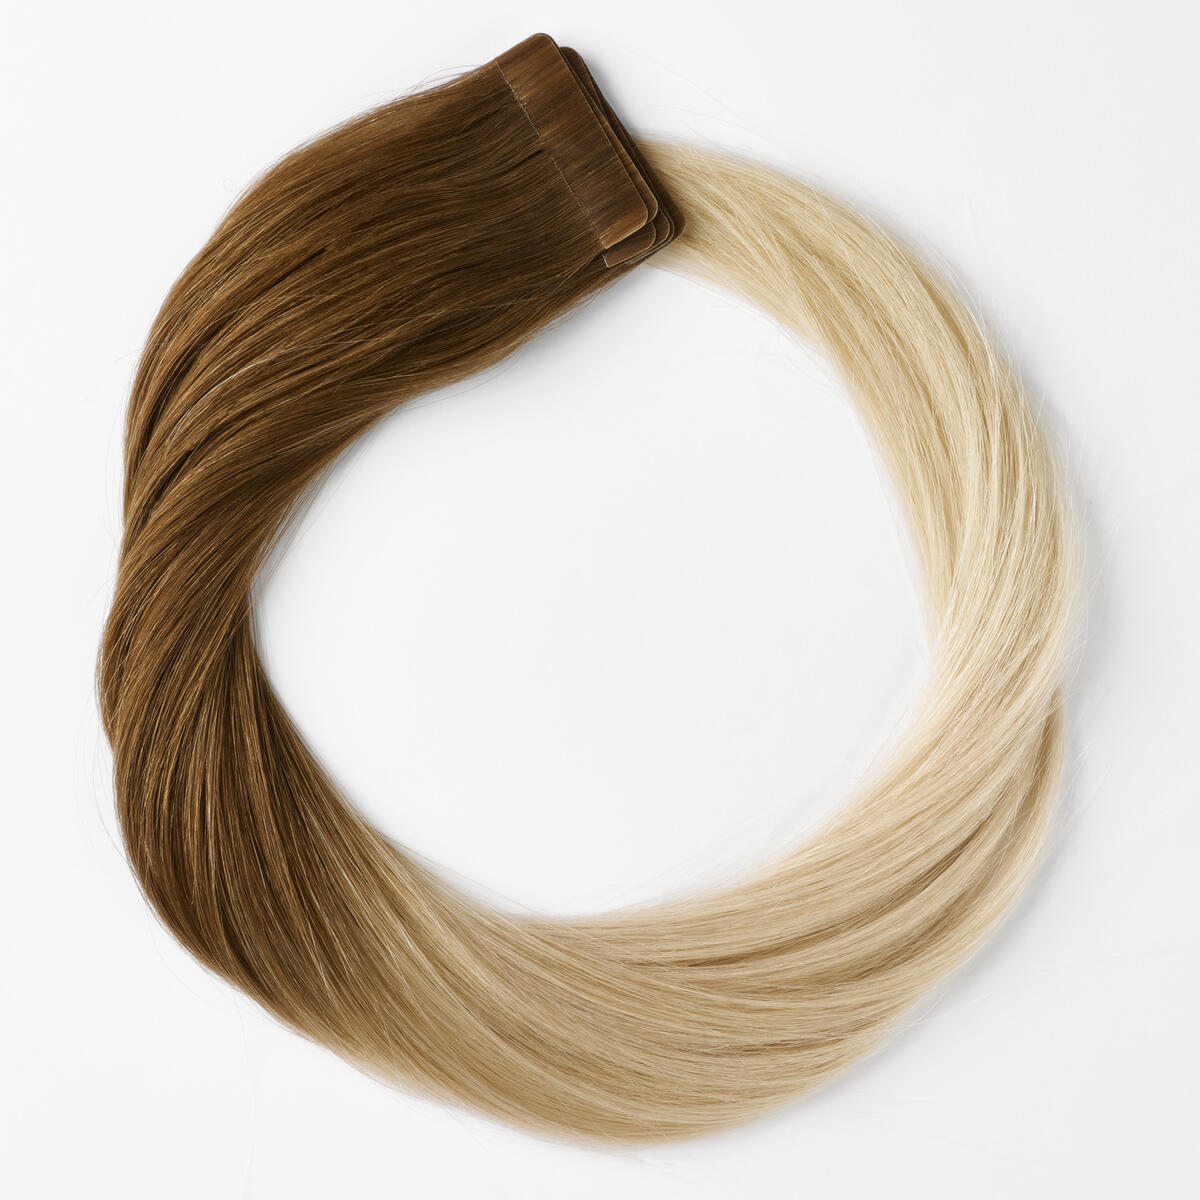 Basic Tape Extensions Classic 4 O5.1/10.8 Medium Ash Blond Ombre 60 cm